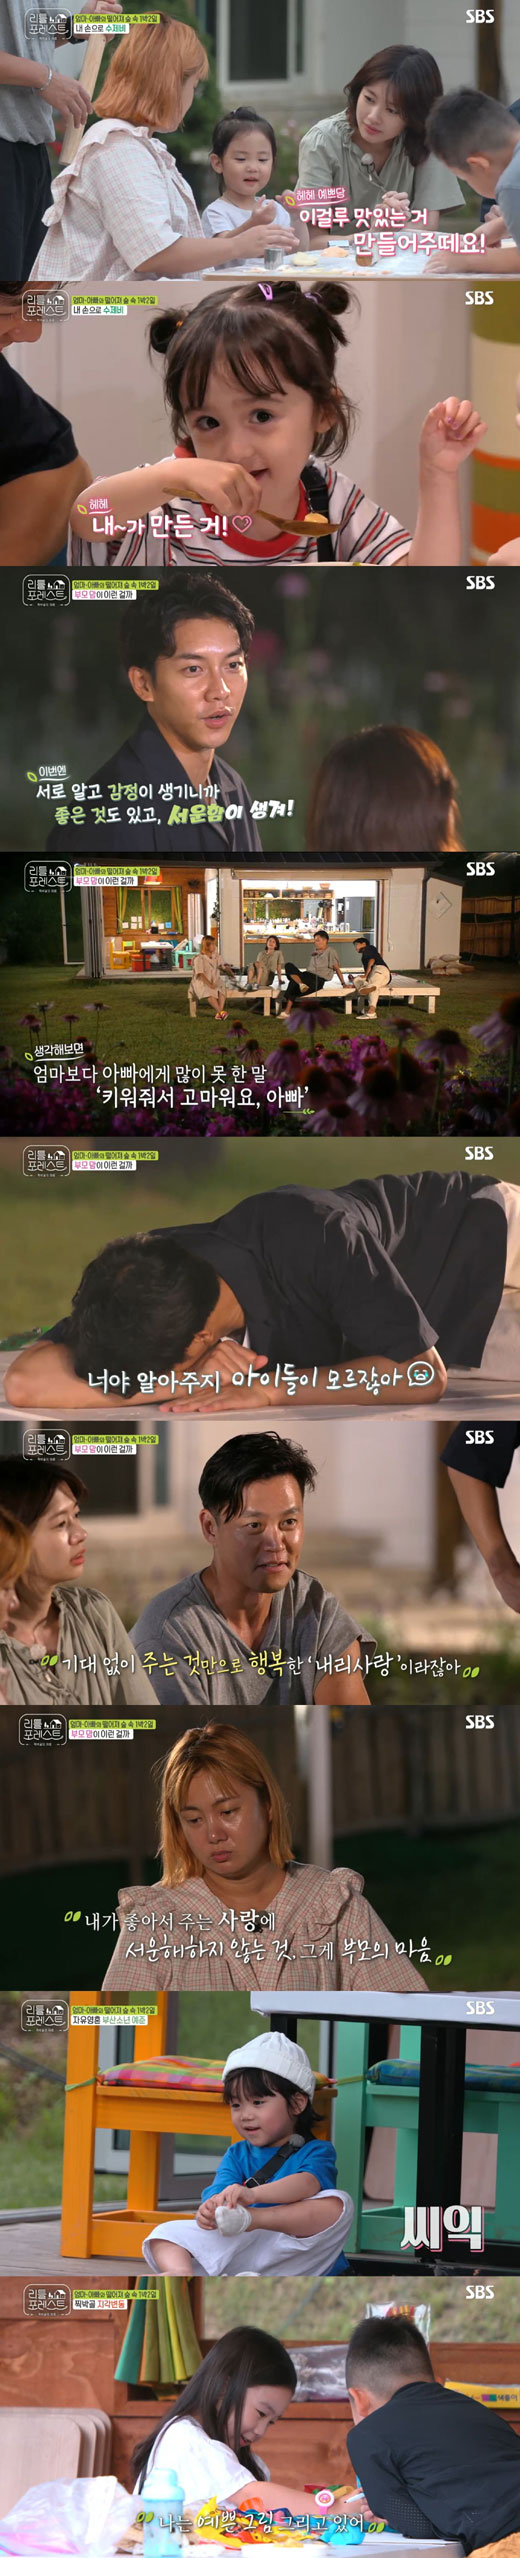 Members of the SBS Moonhwa entertainment program Little Forest sympathized with their parents in the second parting.On the 3rd broadcast Little Forest, a second farewell with the children and a third meeting with two new friends were drawn.After the watering in the valley on the day of the show, Lee Hyun, Brooke, and Grace fell asleep. Jung Han, Lee Han, had a romantic time talking about rising up with Uncle Seung-gi.Lee Seung-gi said, I think of Kongbijijige, while Jung Han-yi said, Popcorn comes up, and Lee Han-yi said, It is a Dracula shape.Meanwhile, Lee Seo-jin prepared Sujebi, which utilized the remaining white soup, as a lunch menu; Little also added fern hand and participated in making Sujebi himself.Littles were interested in the strange touch and shot hearts and star-shaped Sujebi.The thick chicken soup Sujebi was completed and the little ones started to eat more deliciously with the pride that they made it themselves.However, Lee Han-yi was unable to eat unlike usual due to his stamina, and he got up first and worried about everyone.The second breakup time came with Little. Littles went back to their parents and the members talked.Lee Seung-gi said, I know each other with my children and have feelings, so I have good things, but I feel sad. I thought I did not know my mind.Lee Seo-jin said, Children are love, I like it, so I should not be sorry.The third meeting day at the Tjakbukol was followed. In the third meeting, four-year-old Busan boy Yejuni and six-year-old Gaoni joined.As soon as Ye Jun came, he took off his socks and walked around the ball and showed a free soul.Another new friend, Gaon, greeted the camera vigorously and ran around after the flying butterfly, boasting of his eldest sisters brilliance.Meanwhile, Lee approached the new Friend Gaon, who gave his name to him with a shy gesture and hovered around him.The members said, Lee Han was in love with Gaon in Brook. I was in love.At this time, Brooke appeared, and I wondered how the triangular relationship between the three little people who fell alone would lead.Meanwhile, Little Forest is broadcast every Monday and Tuesday at 10 pm.